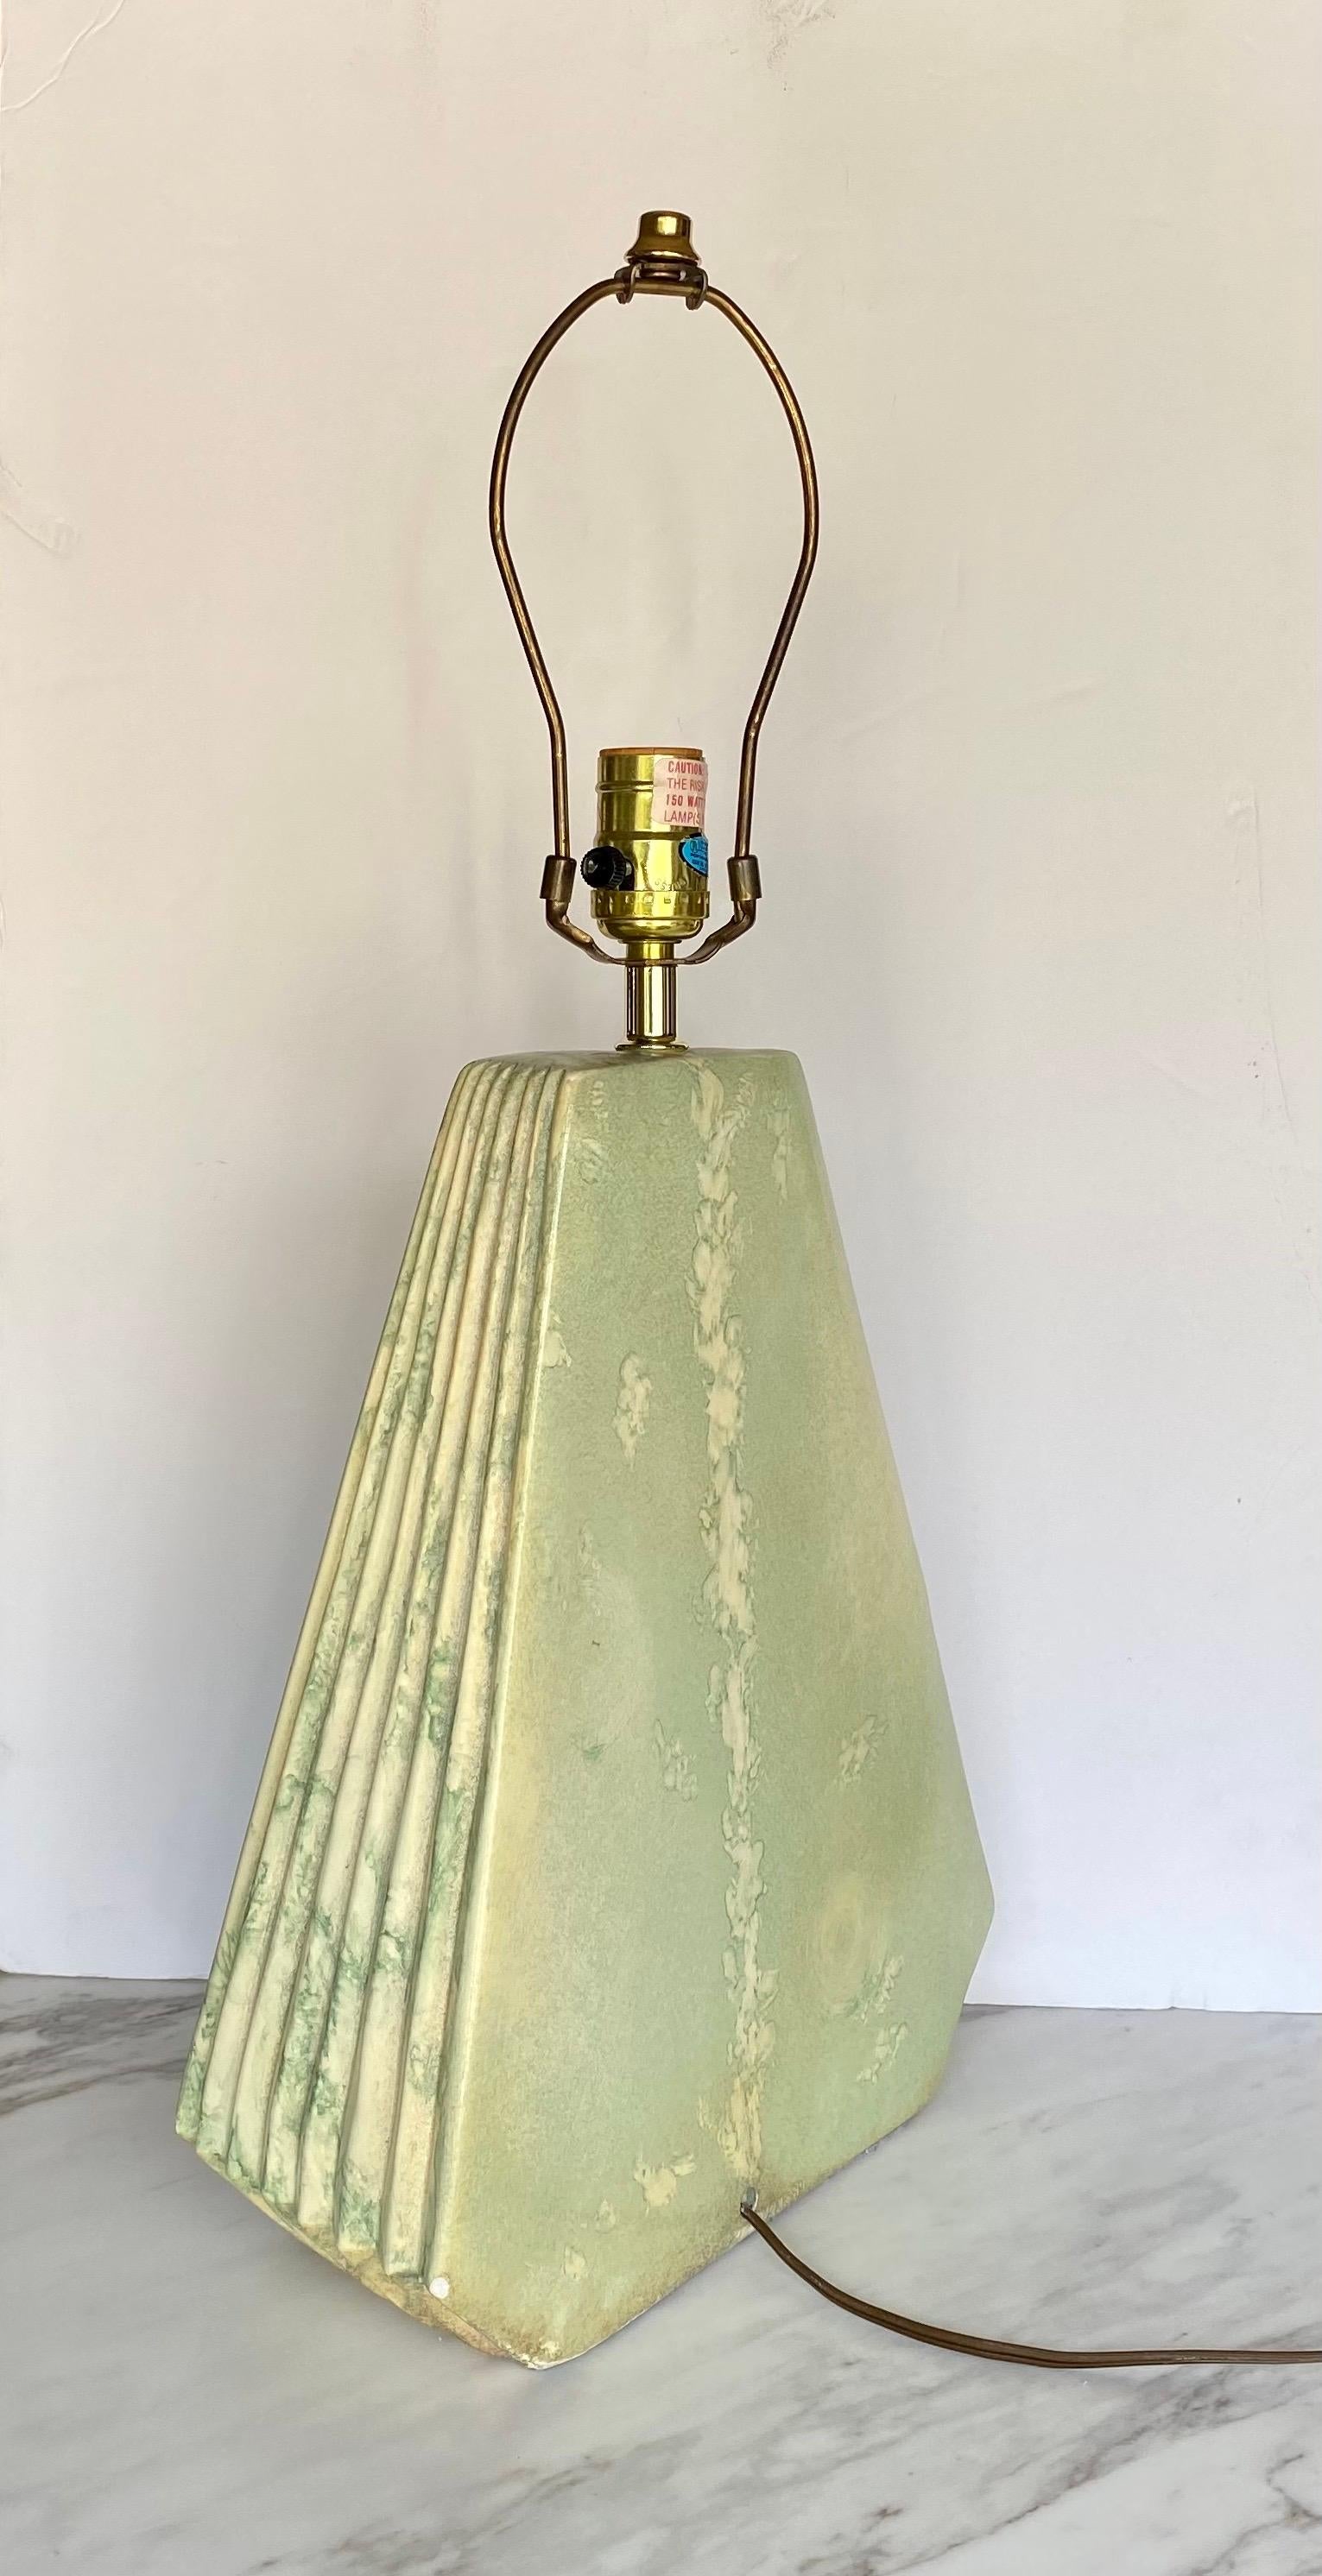 Mid-Century Modern geometric plaster table lamp with ribbed or pleated detailing. This sculptural triangular pyramid form lamp features a beautiful pale green and beige matte glaze. Lamp shade not included. 

Measures: Height to finial: 23.5